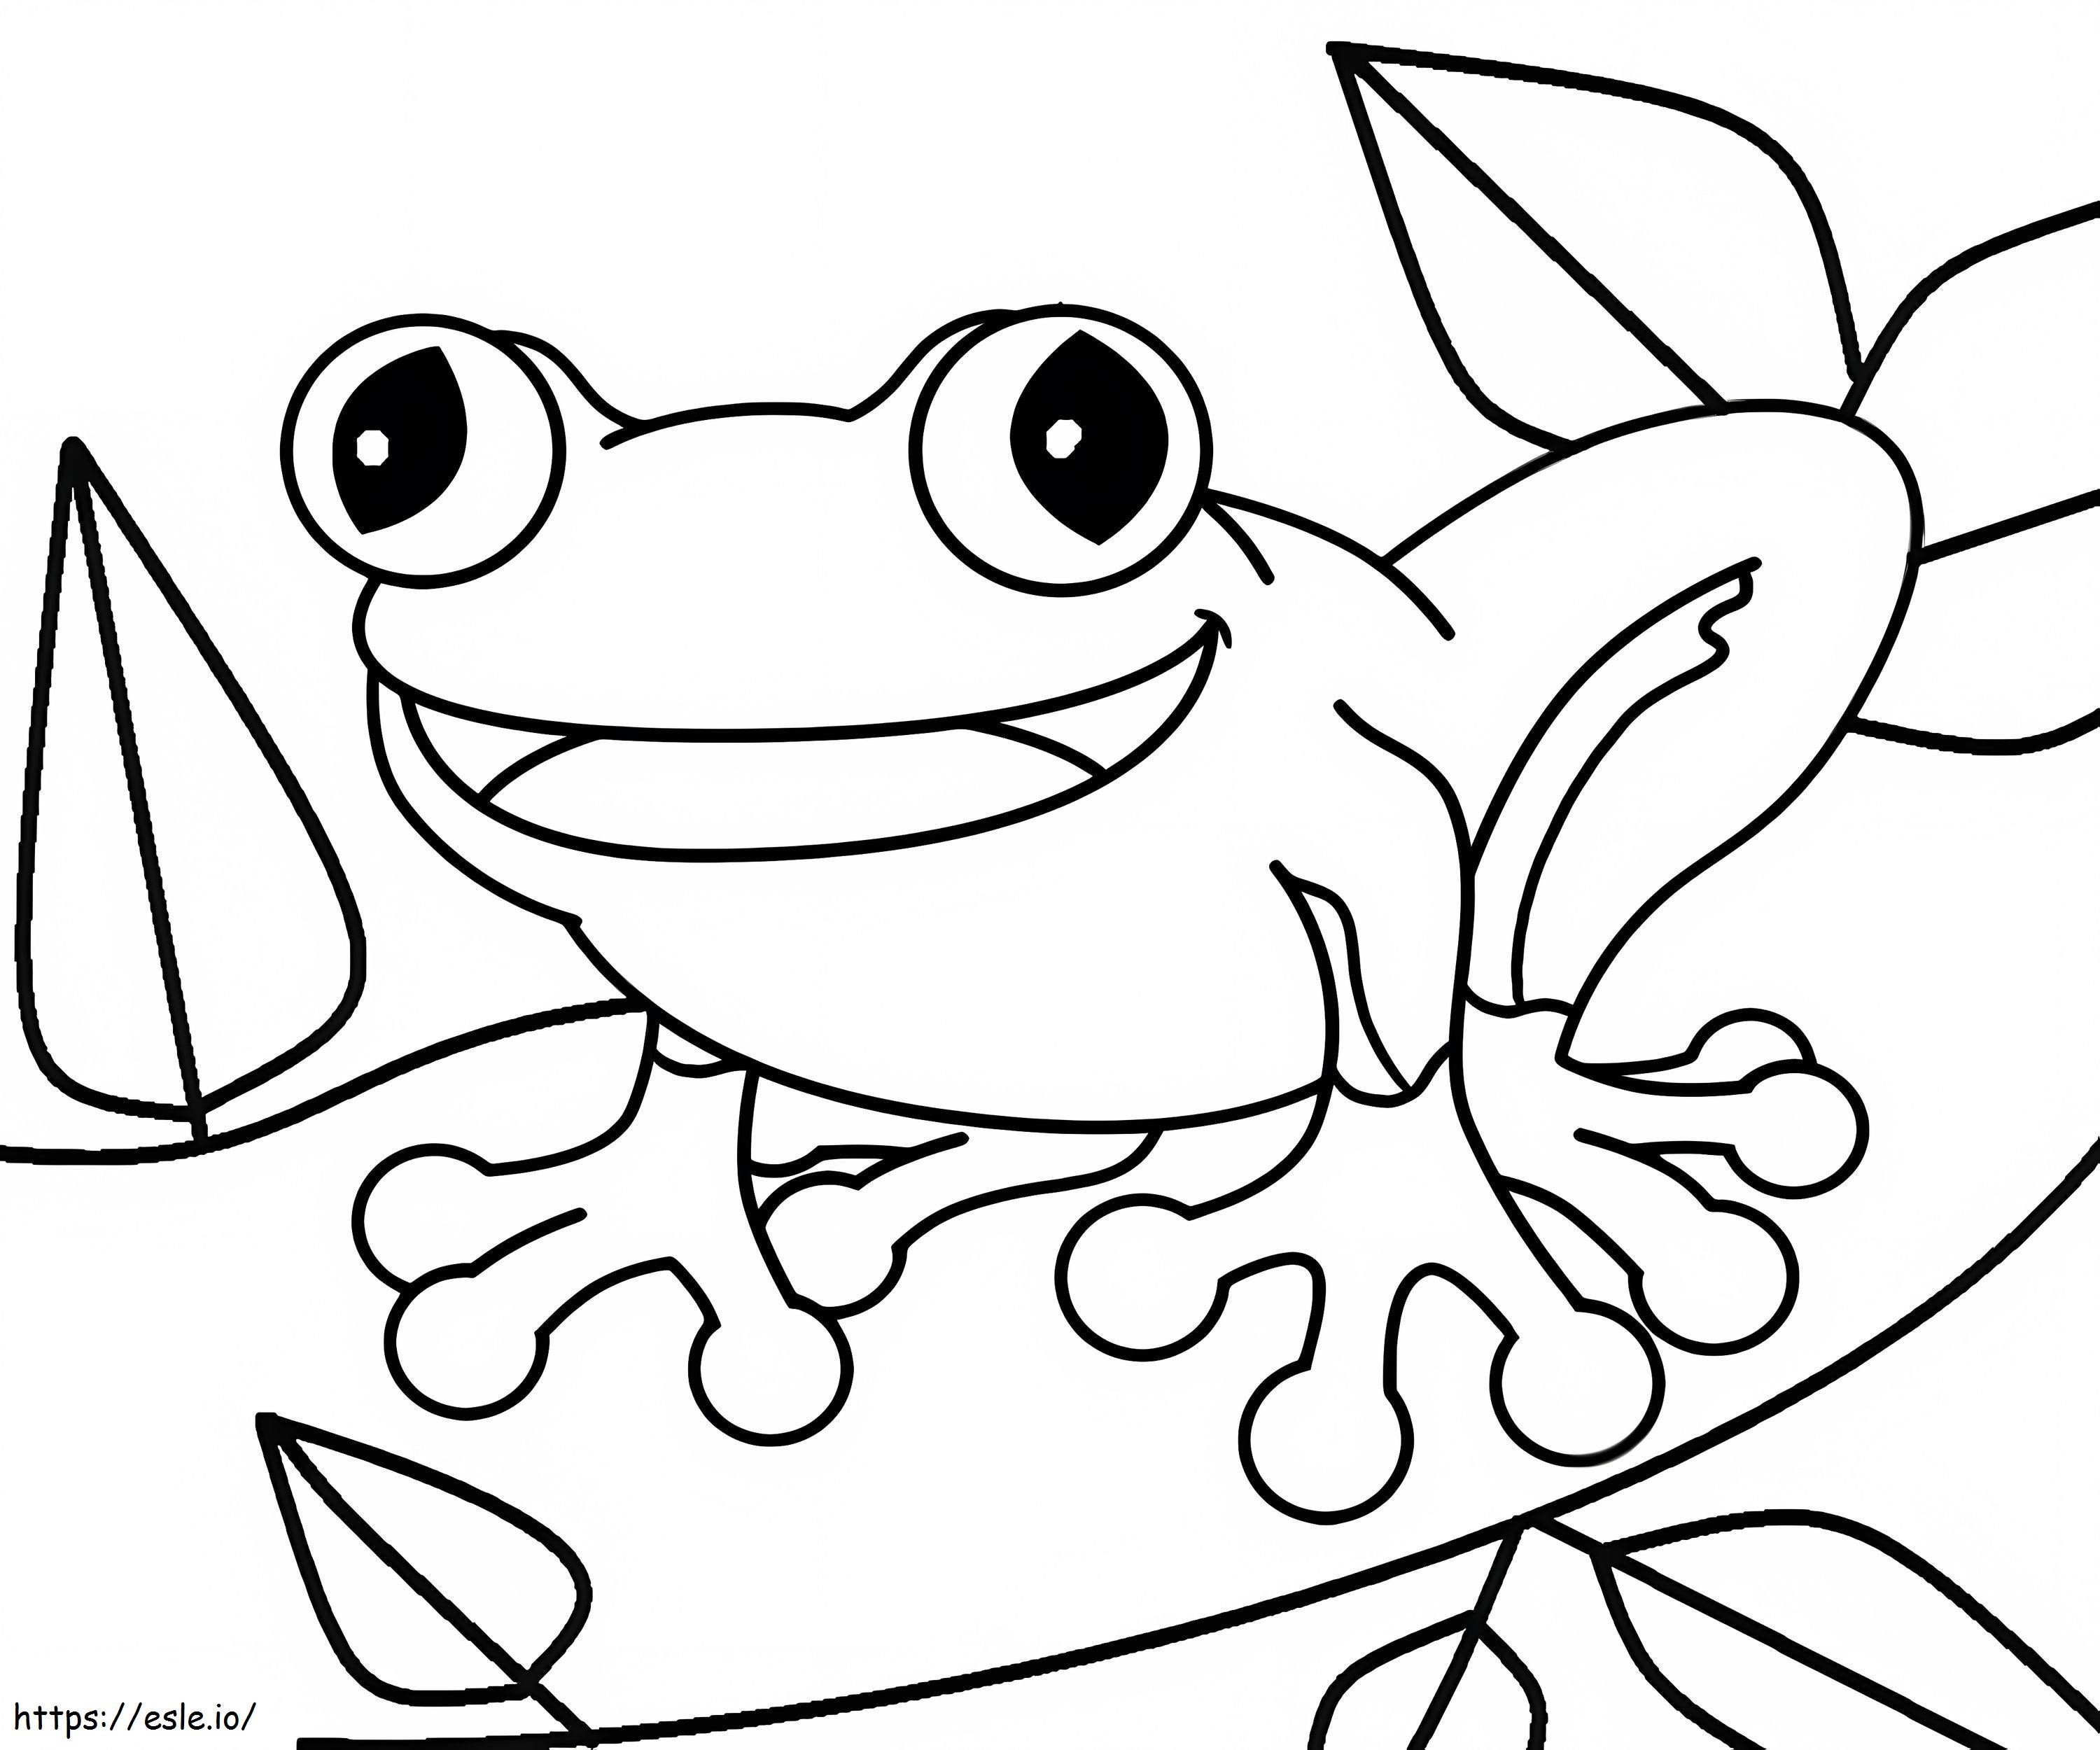 Toad 5 coloring page